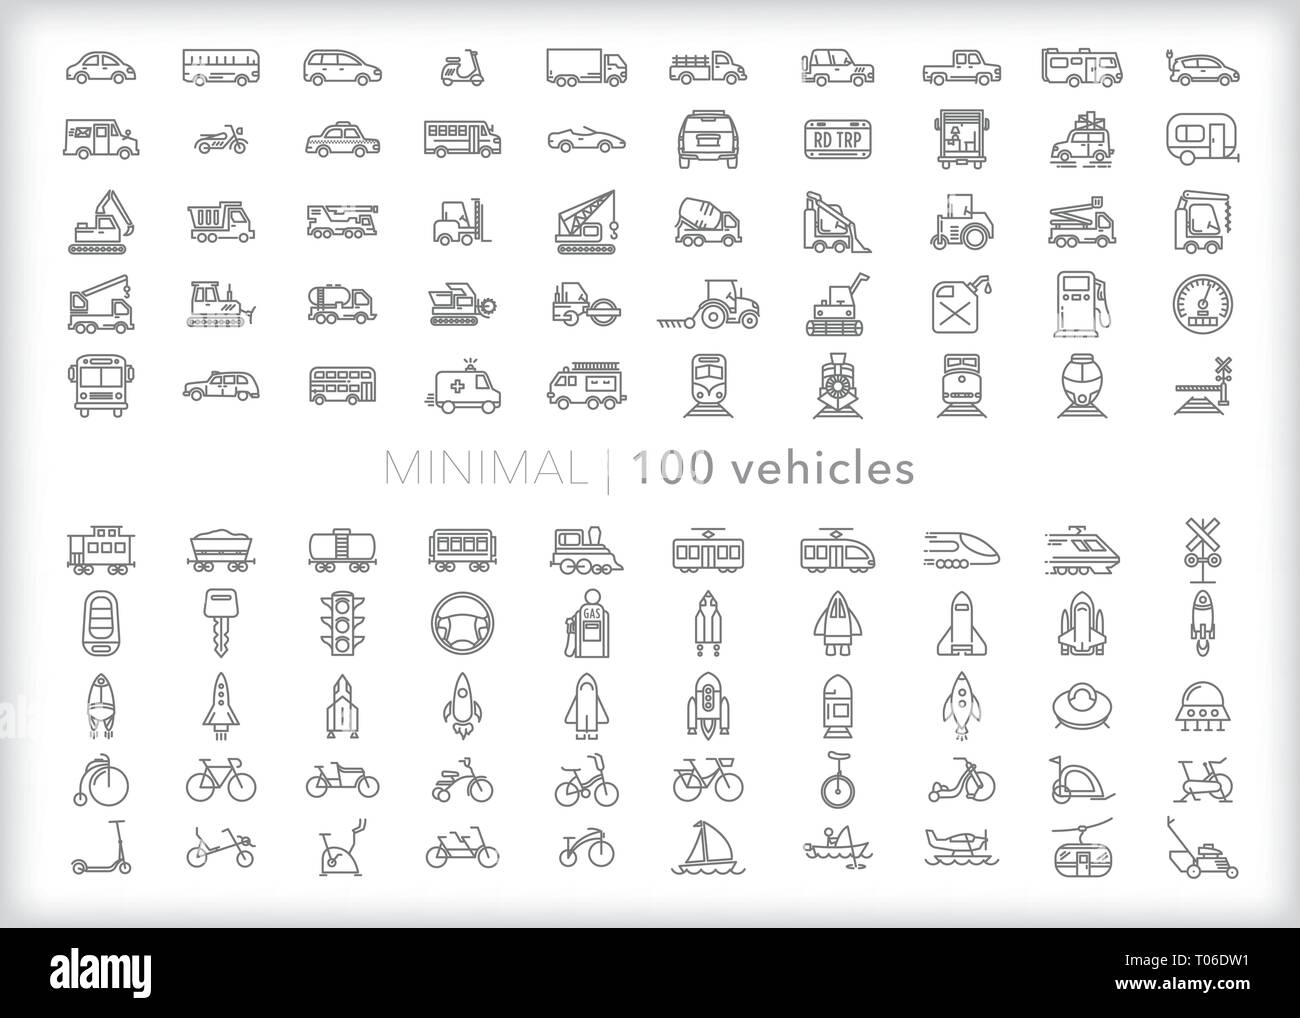 Set of 100 vehicle line icons of car, buses, trucks, rail cars, trains, construction vehicles, bikes, spaceships and boats. Stock Vector